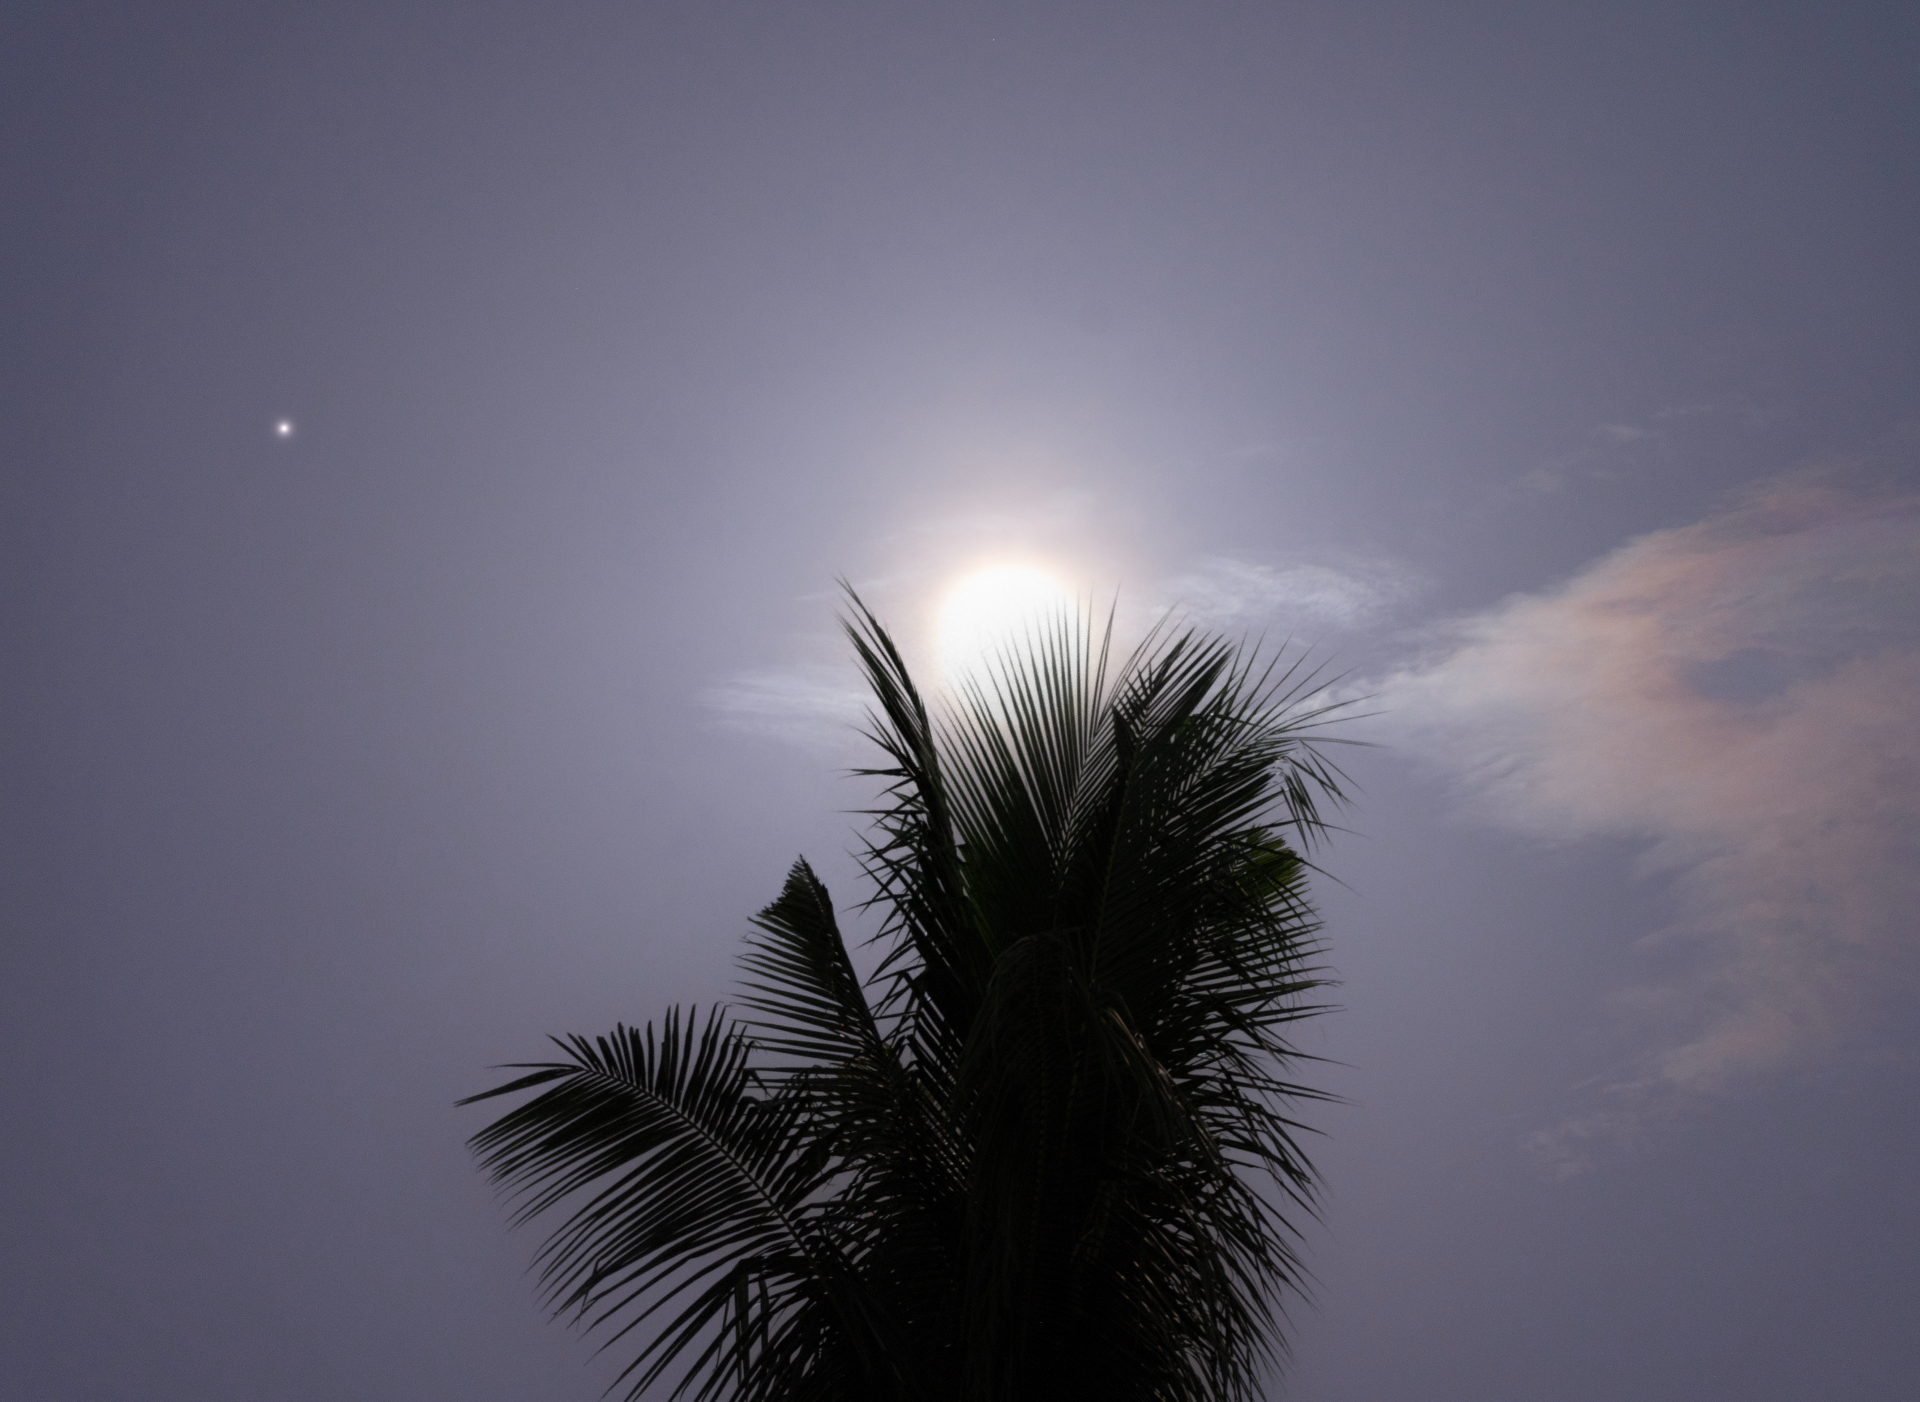 Super Blue Moon shining brightly behind a palm tree with the small dot of saturn visible to the left of the moon.